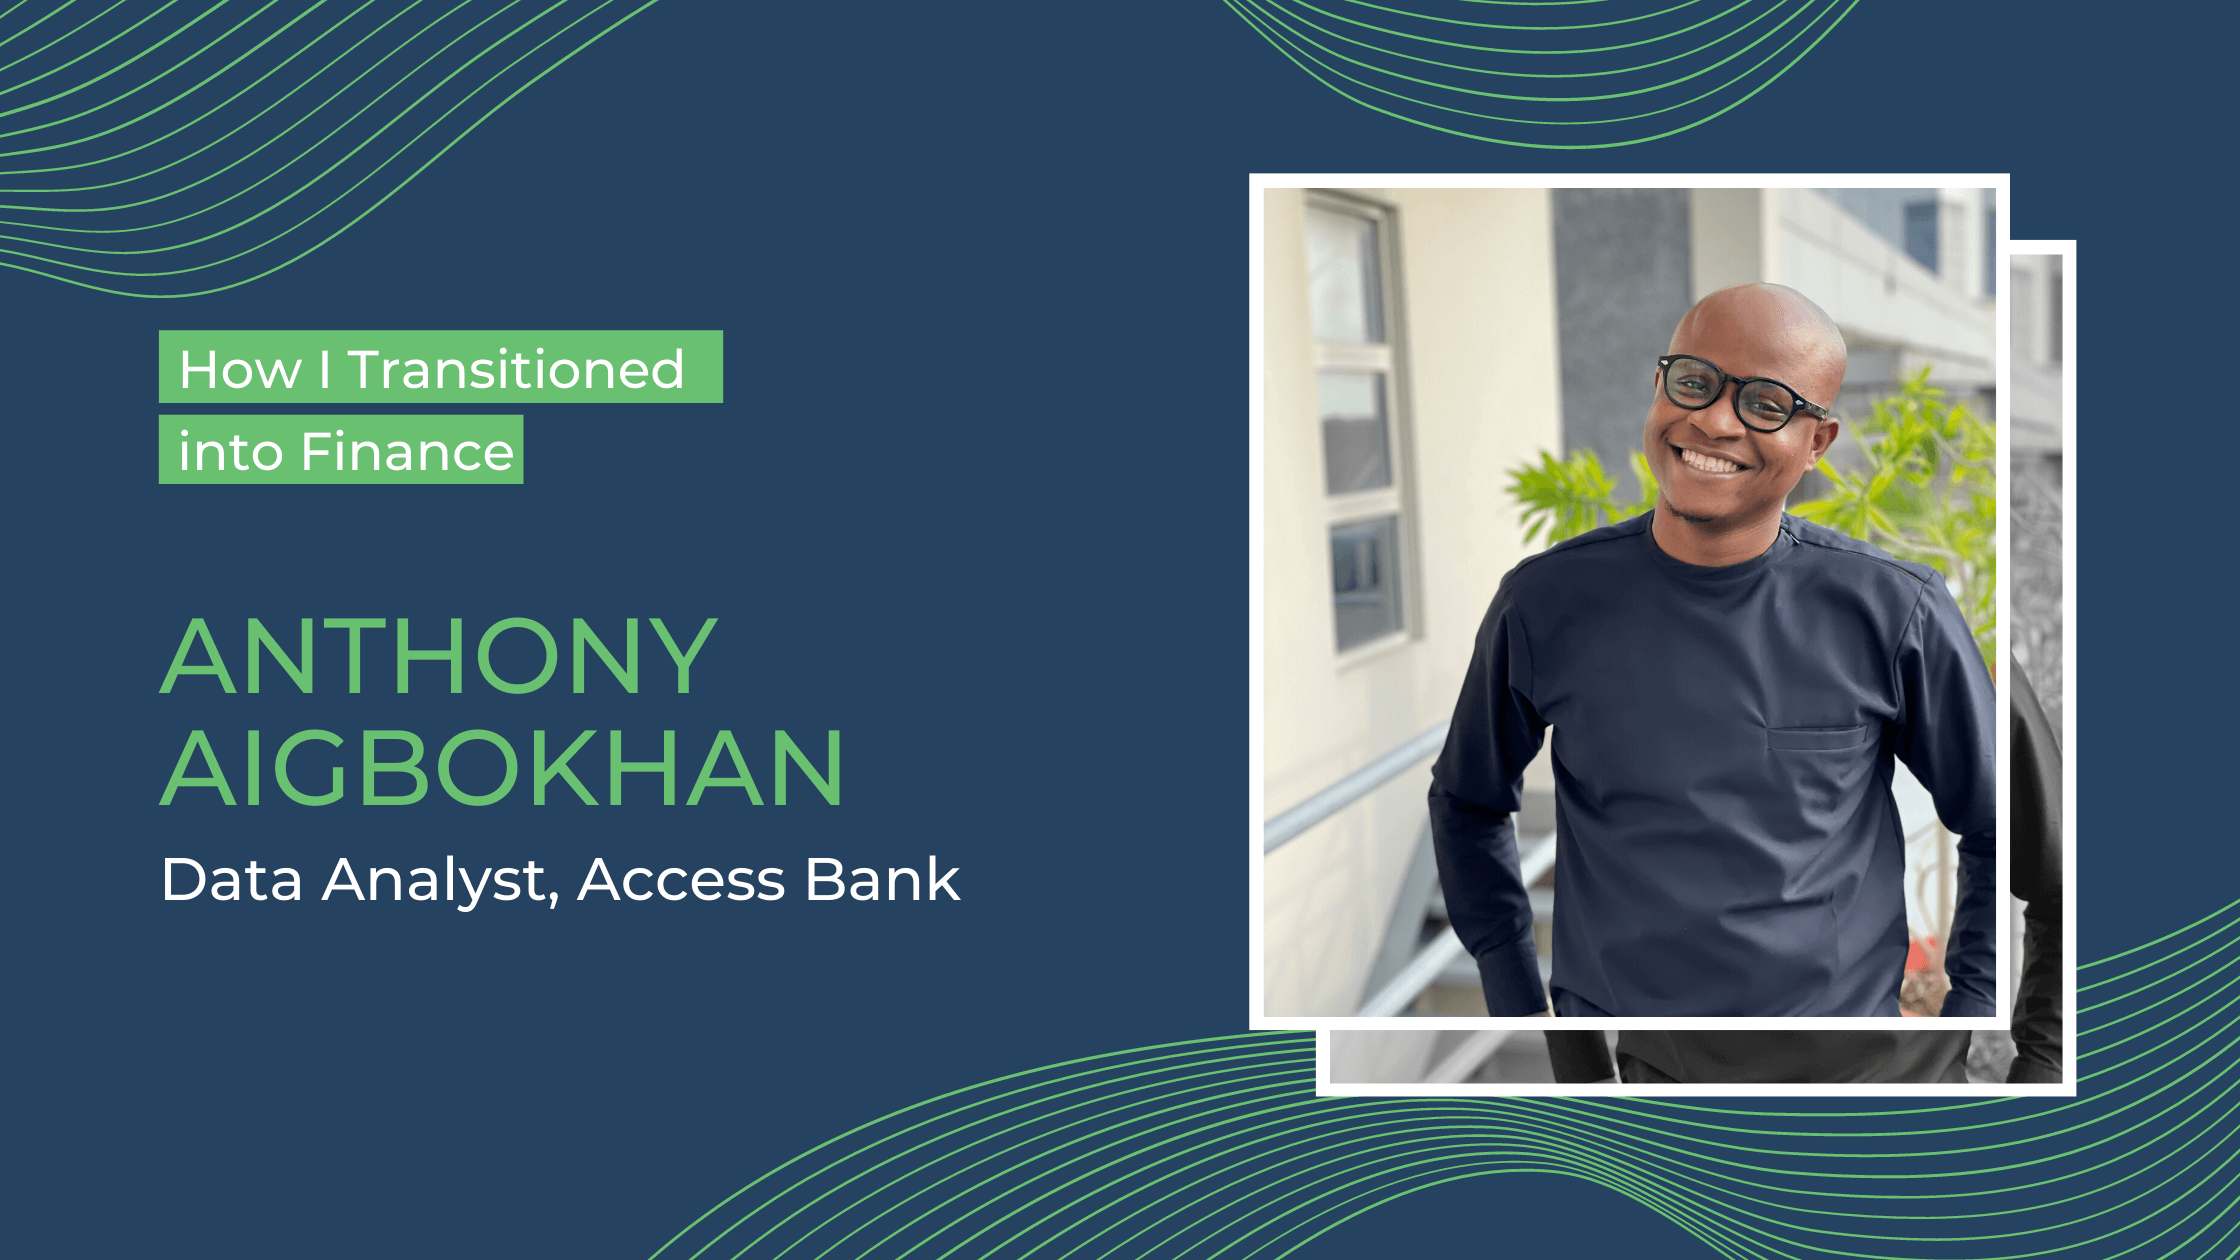 How I transitioned into finance: Anthony Aigbokhan, Data Analyst at Access Bank